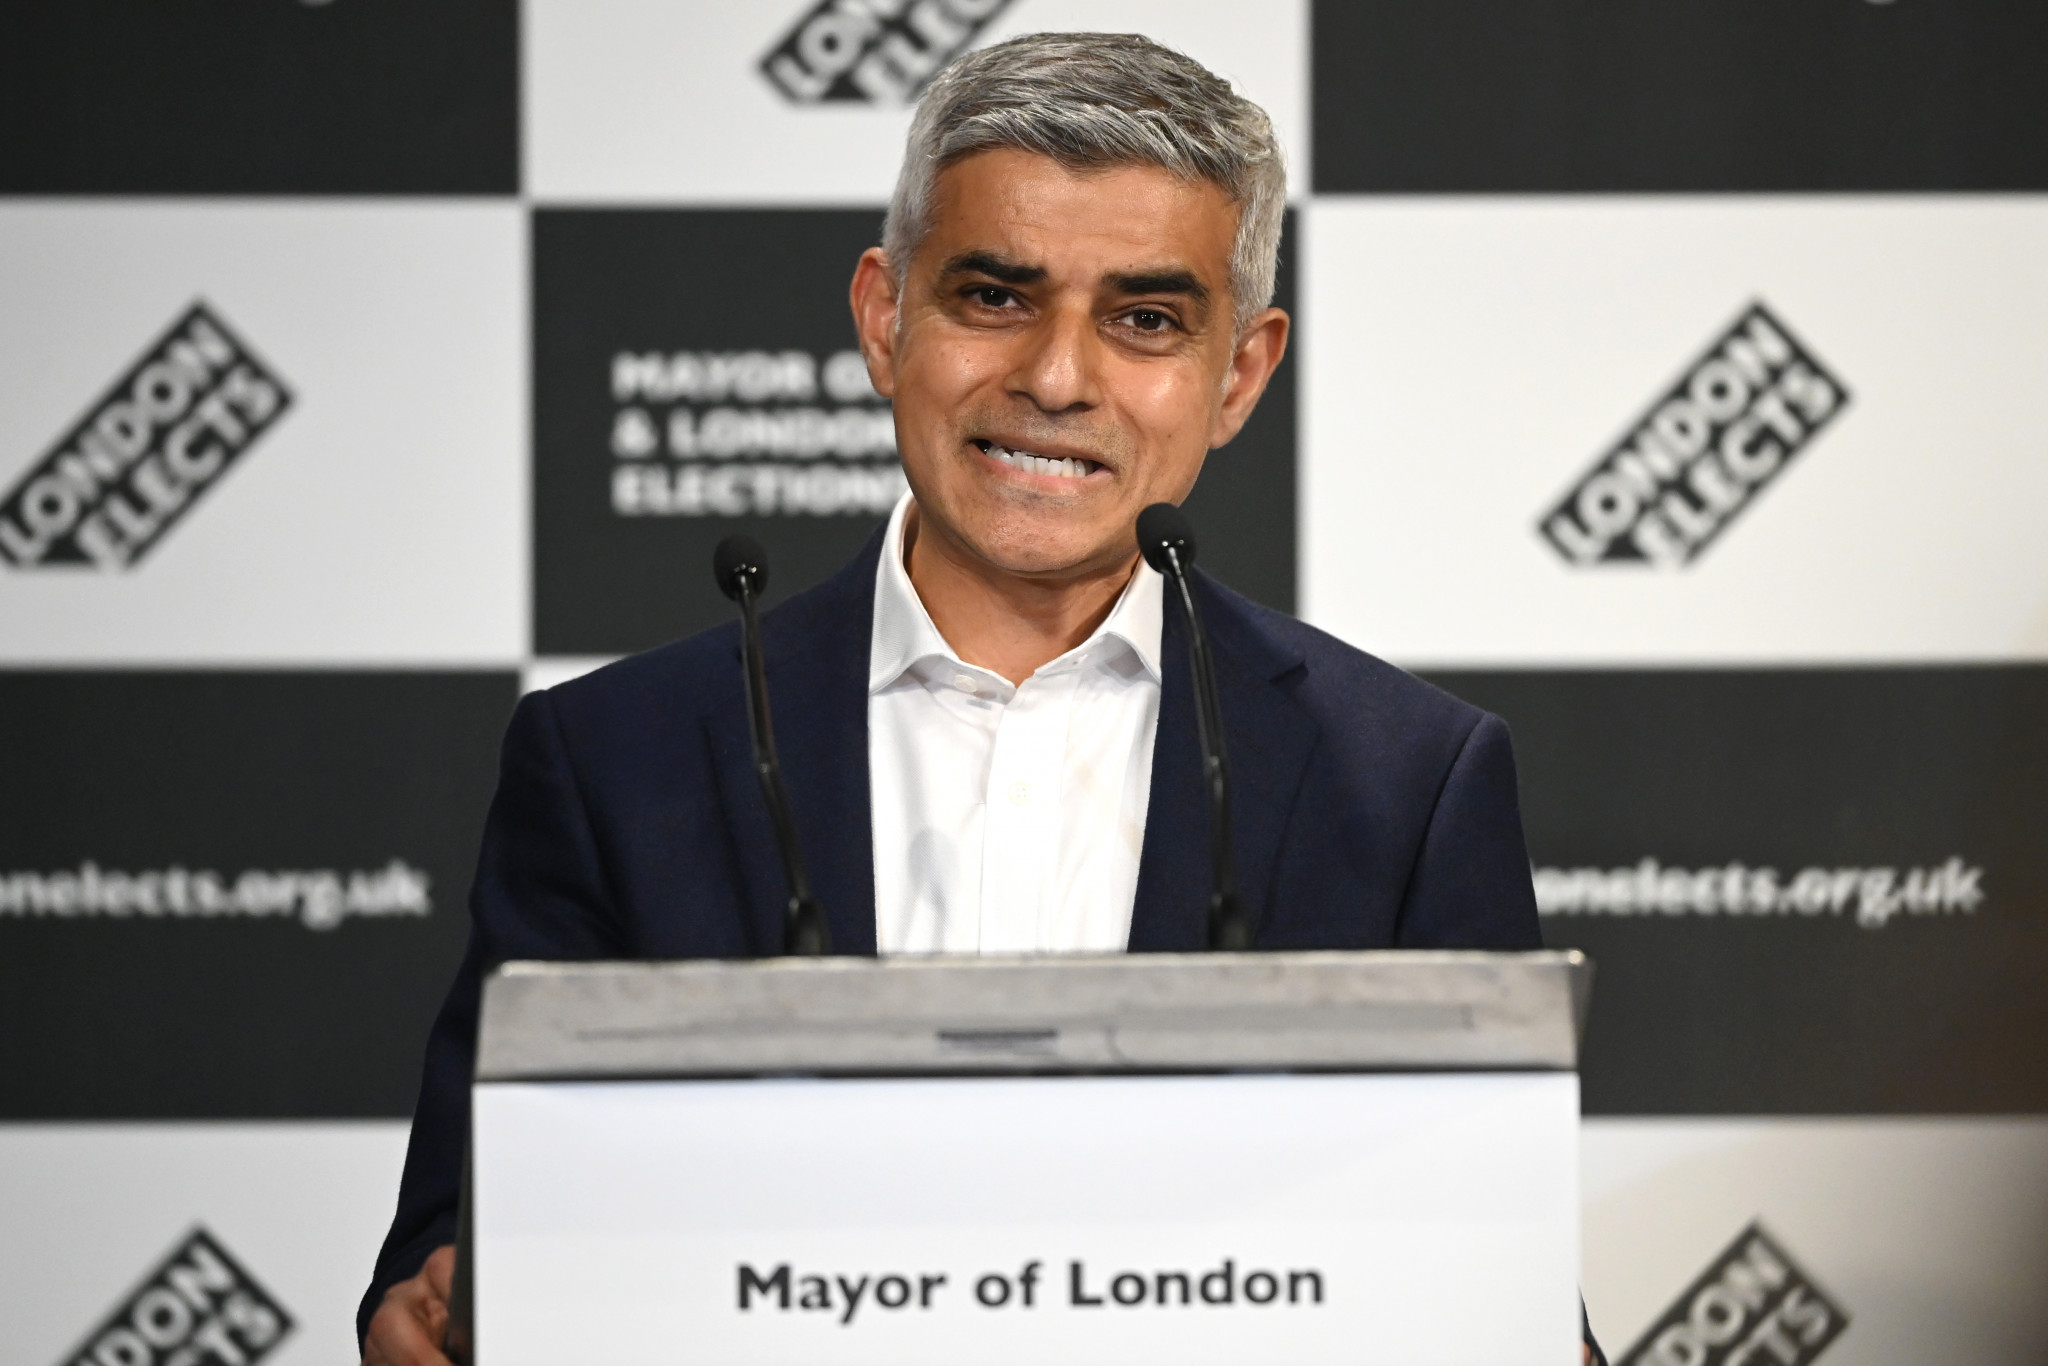 Sadiq Khan pledged to explore a future Olympic and Paralympic bid during his London Mayoral election campaign ©Getty Images